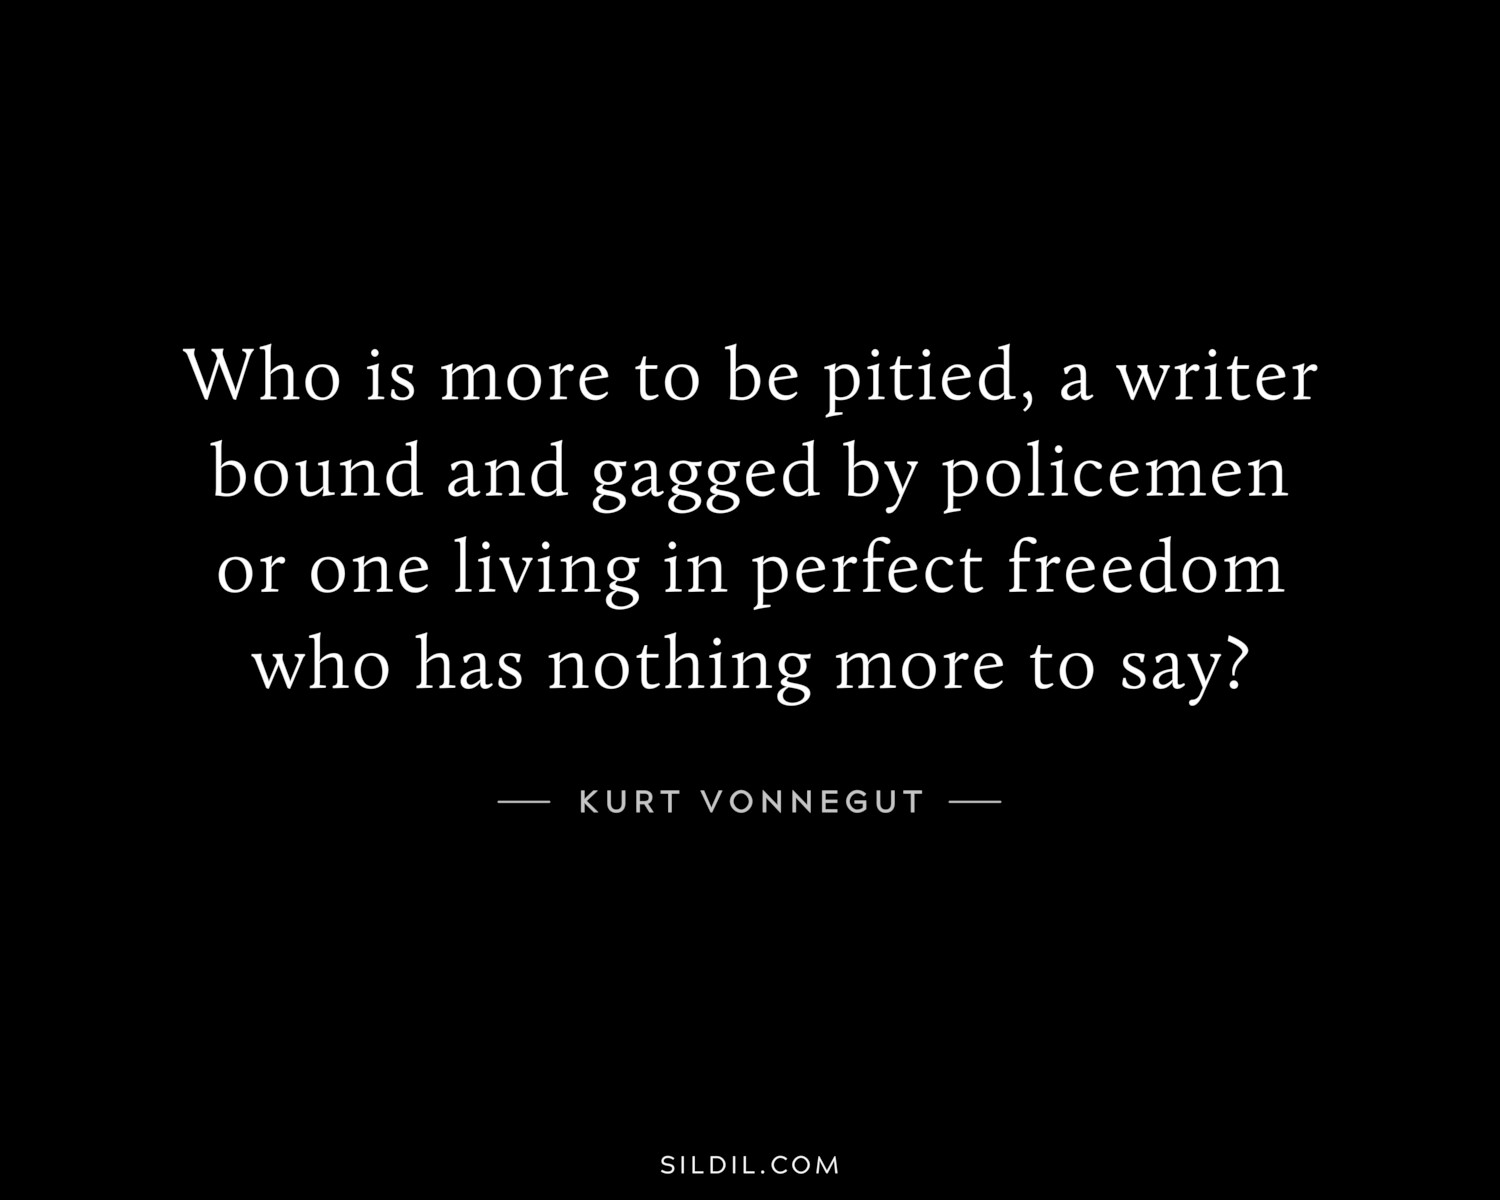 Who is more to be pitied, a writer bound and gagged by policemen or one living in perfect freedom who has nothing more to say?